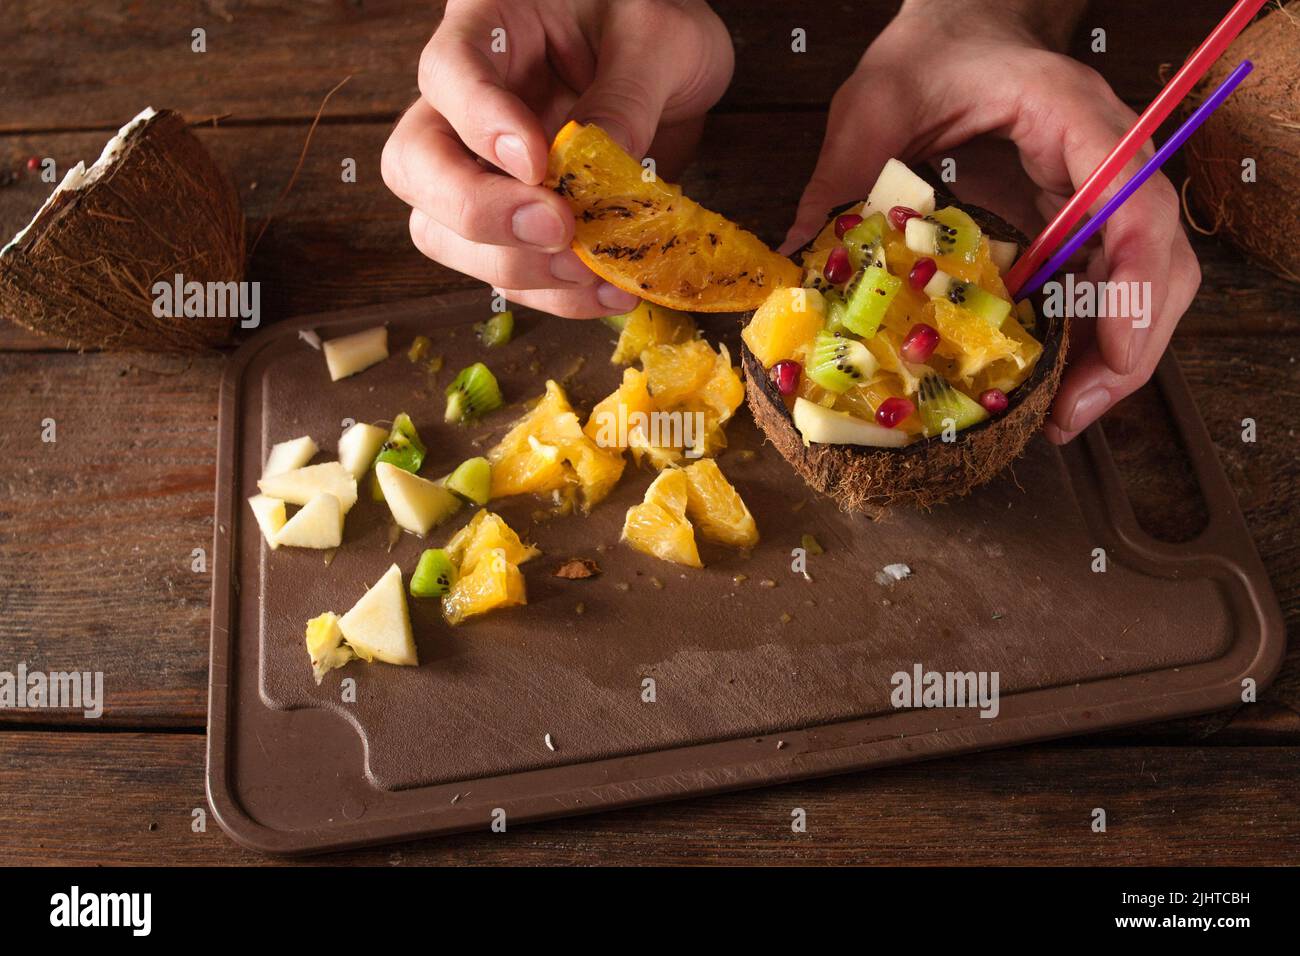 Decoration of fruit salad in coconut shell Stock Photo